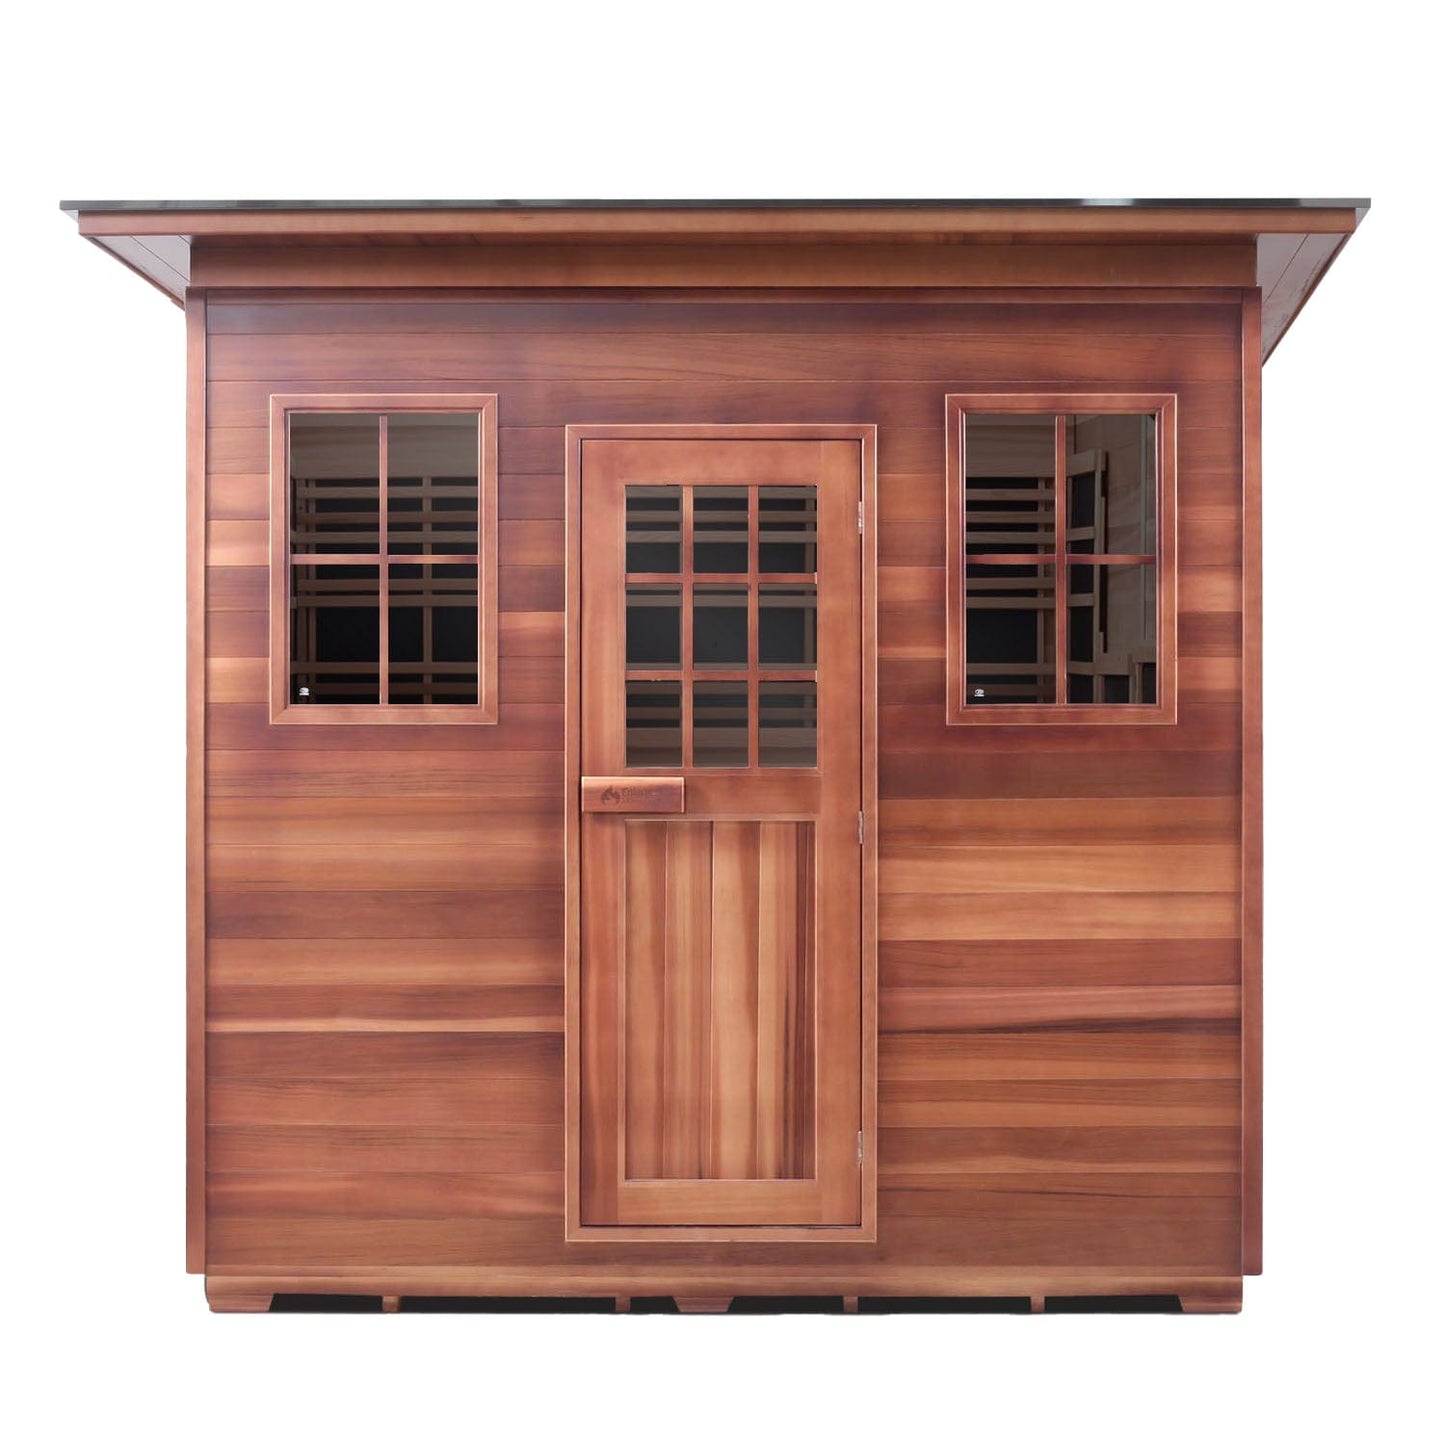 Enlighten H-36680 Slope Roof Sapphire Outdoor 8-Person Hybrid Sauna - both Infrared and Traditional heating